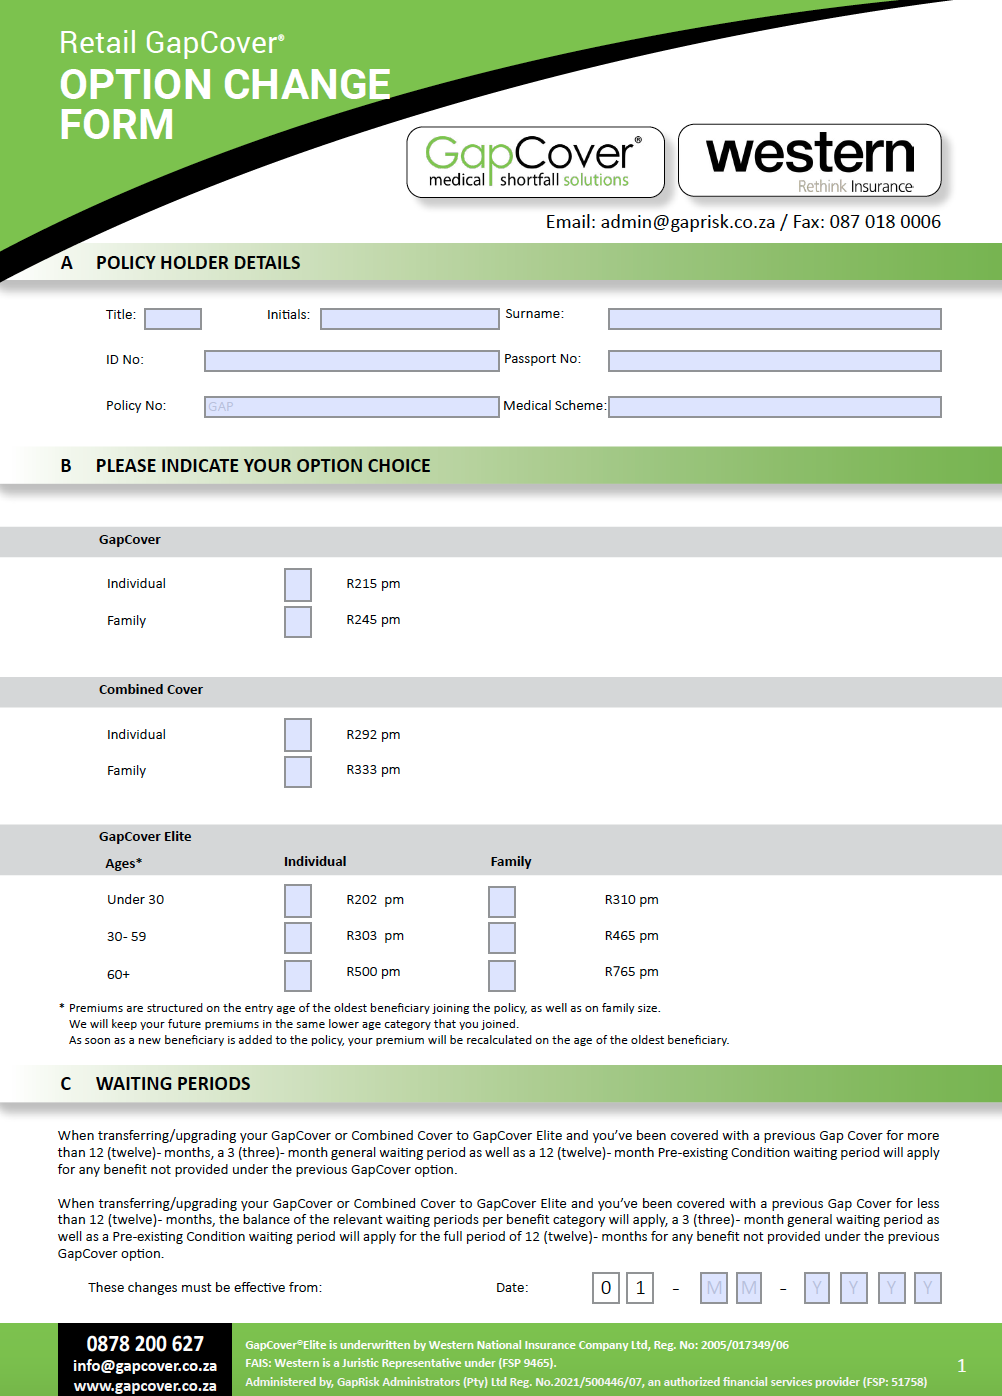 GapCover & Combined Retail Option Change Form